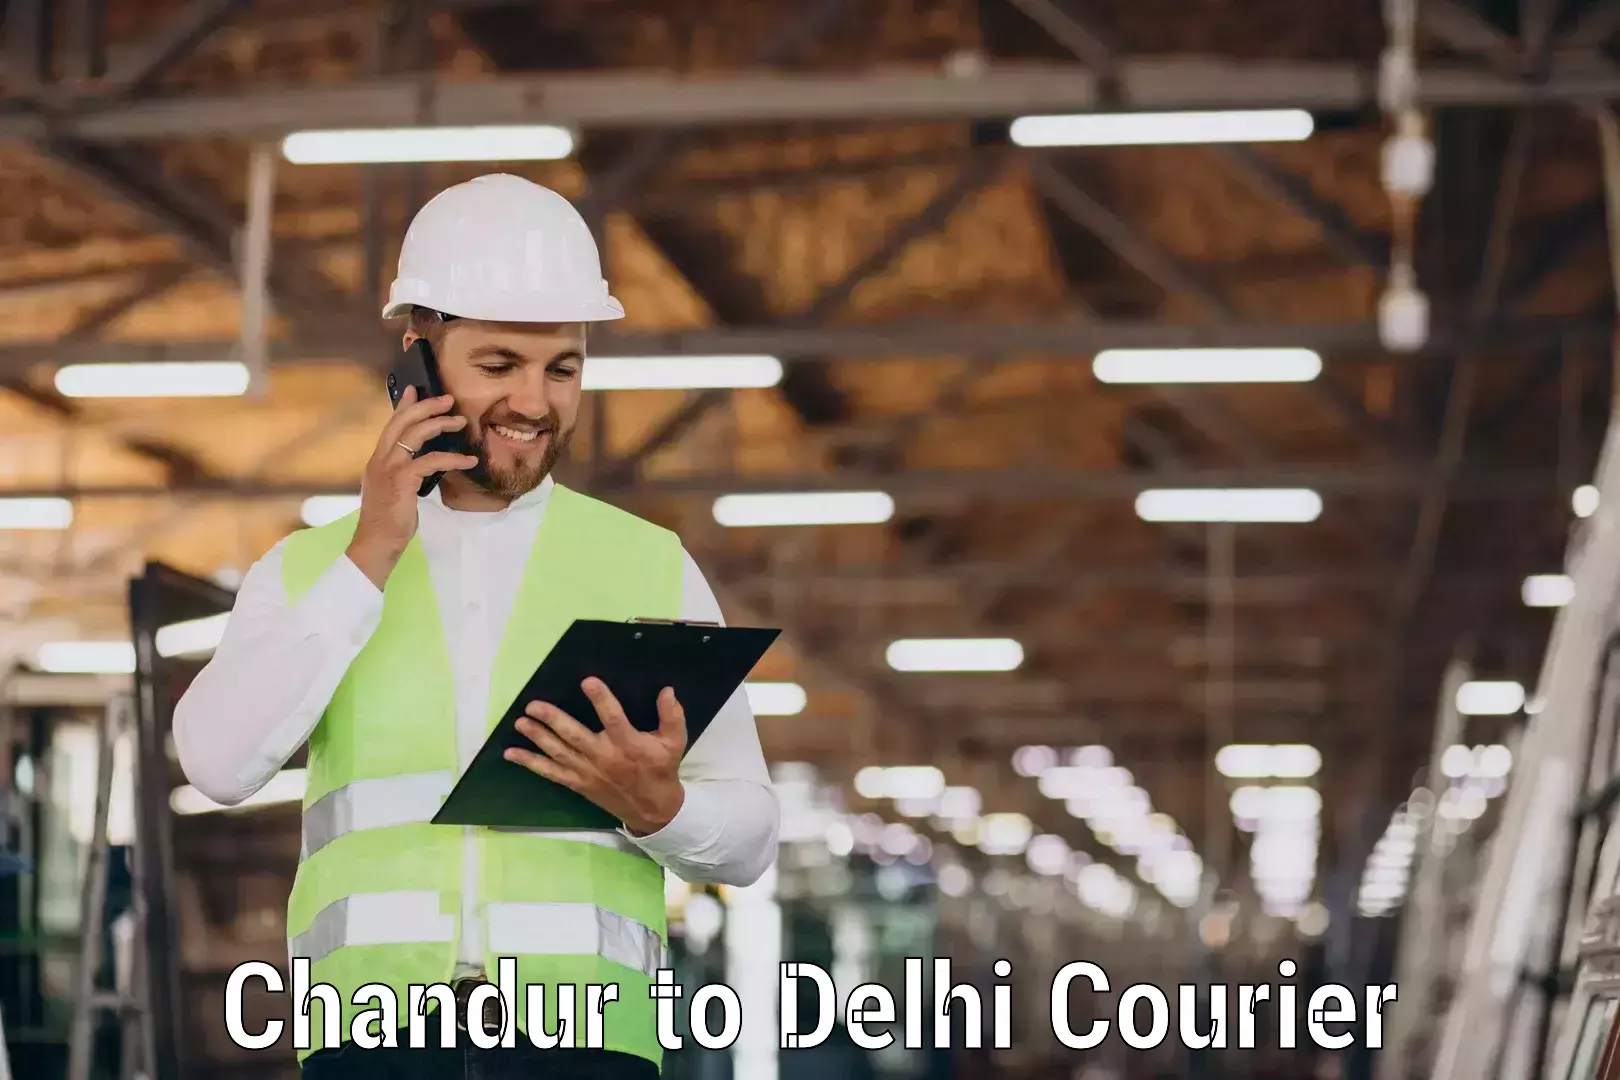 High-priority parcel service Chandur to Lodhi Road